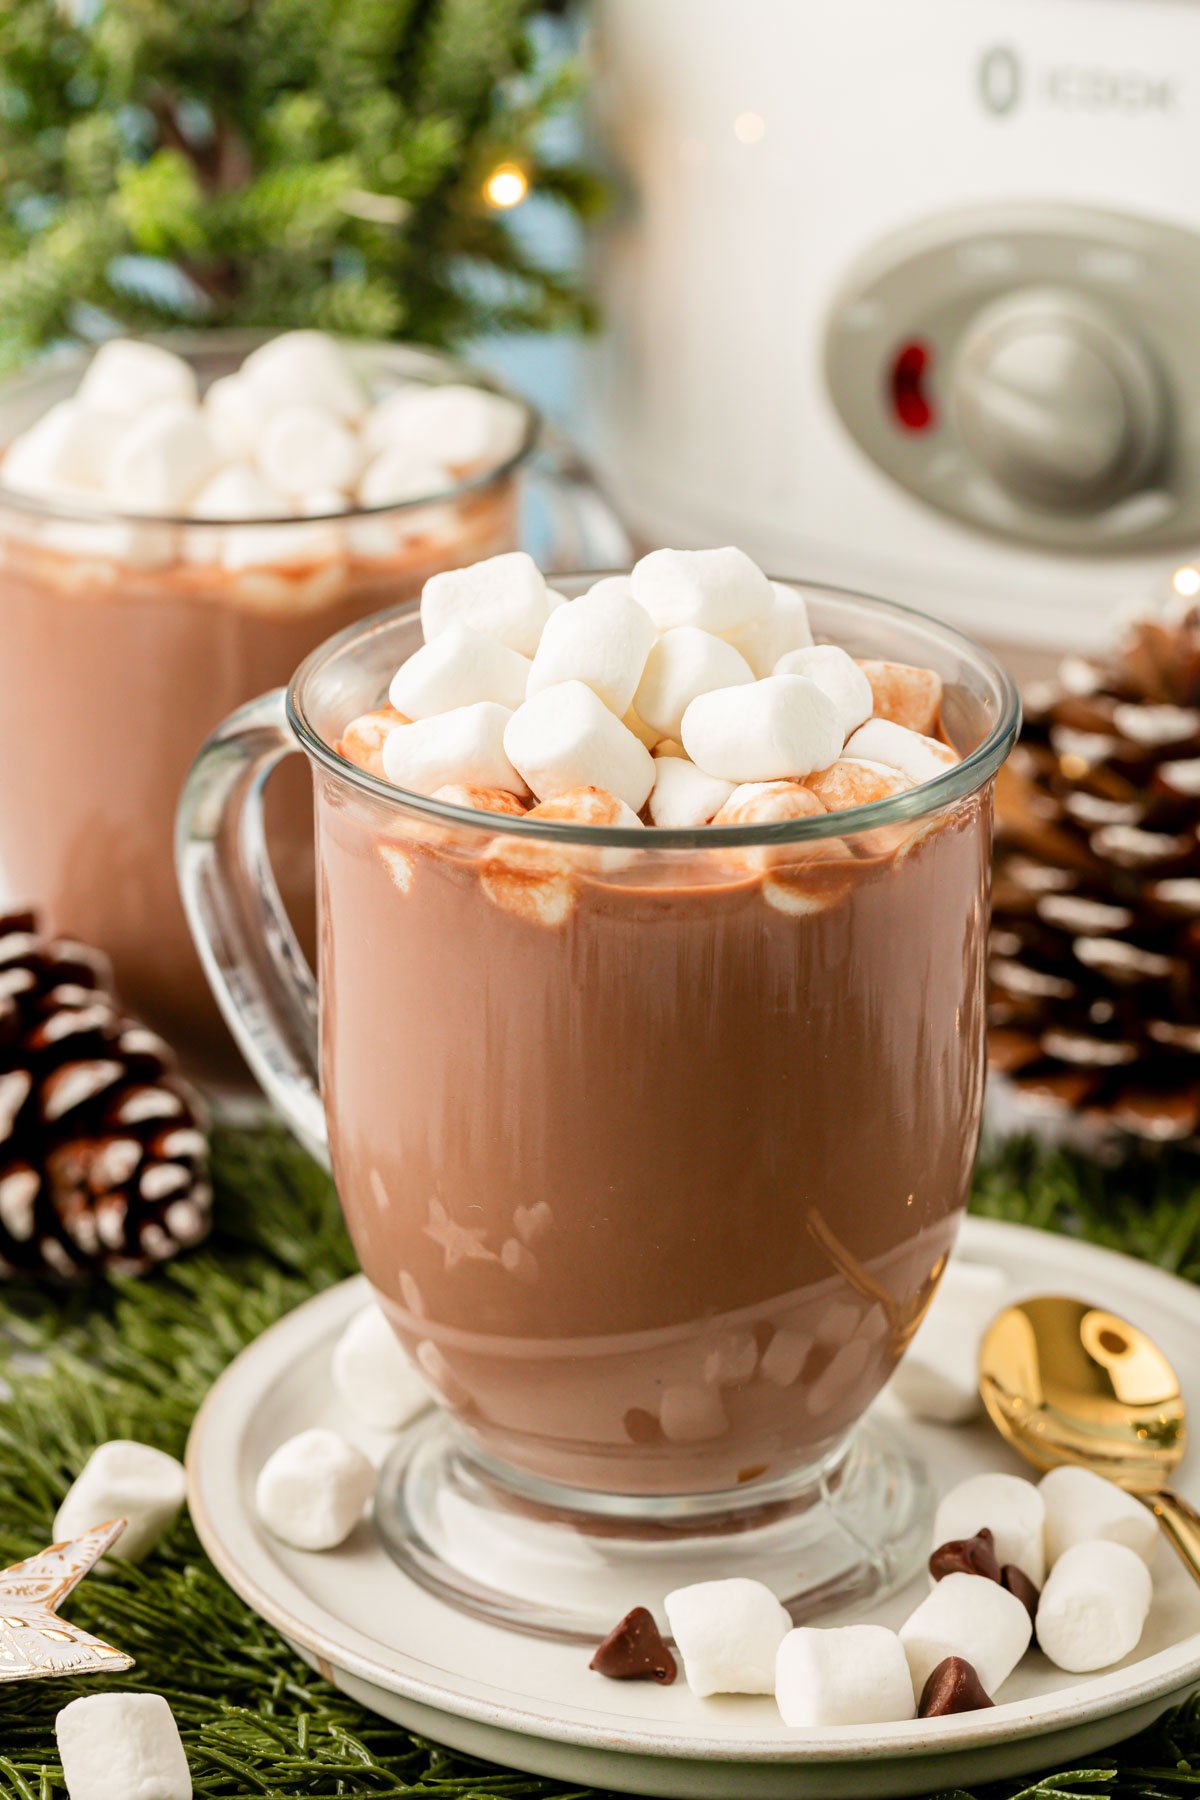 Two mugs in front of a crockpot filled with hot chocolate.